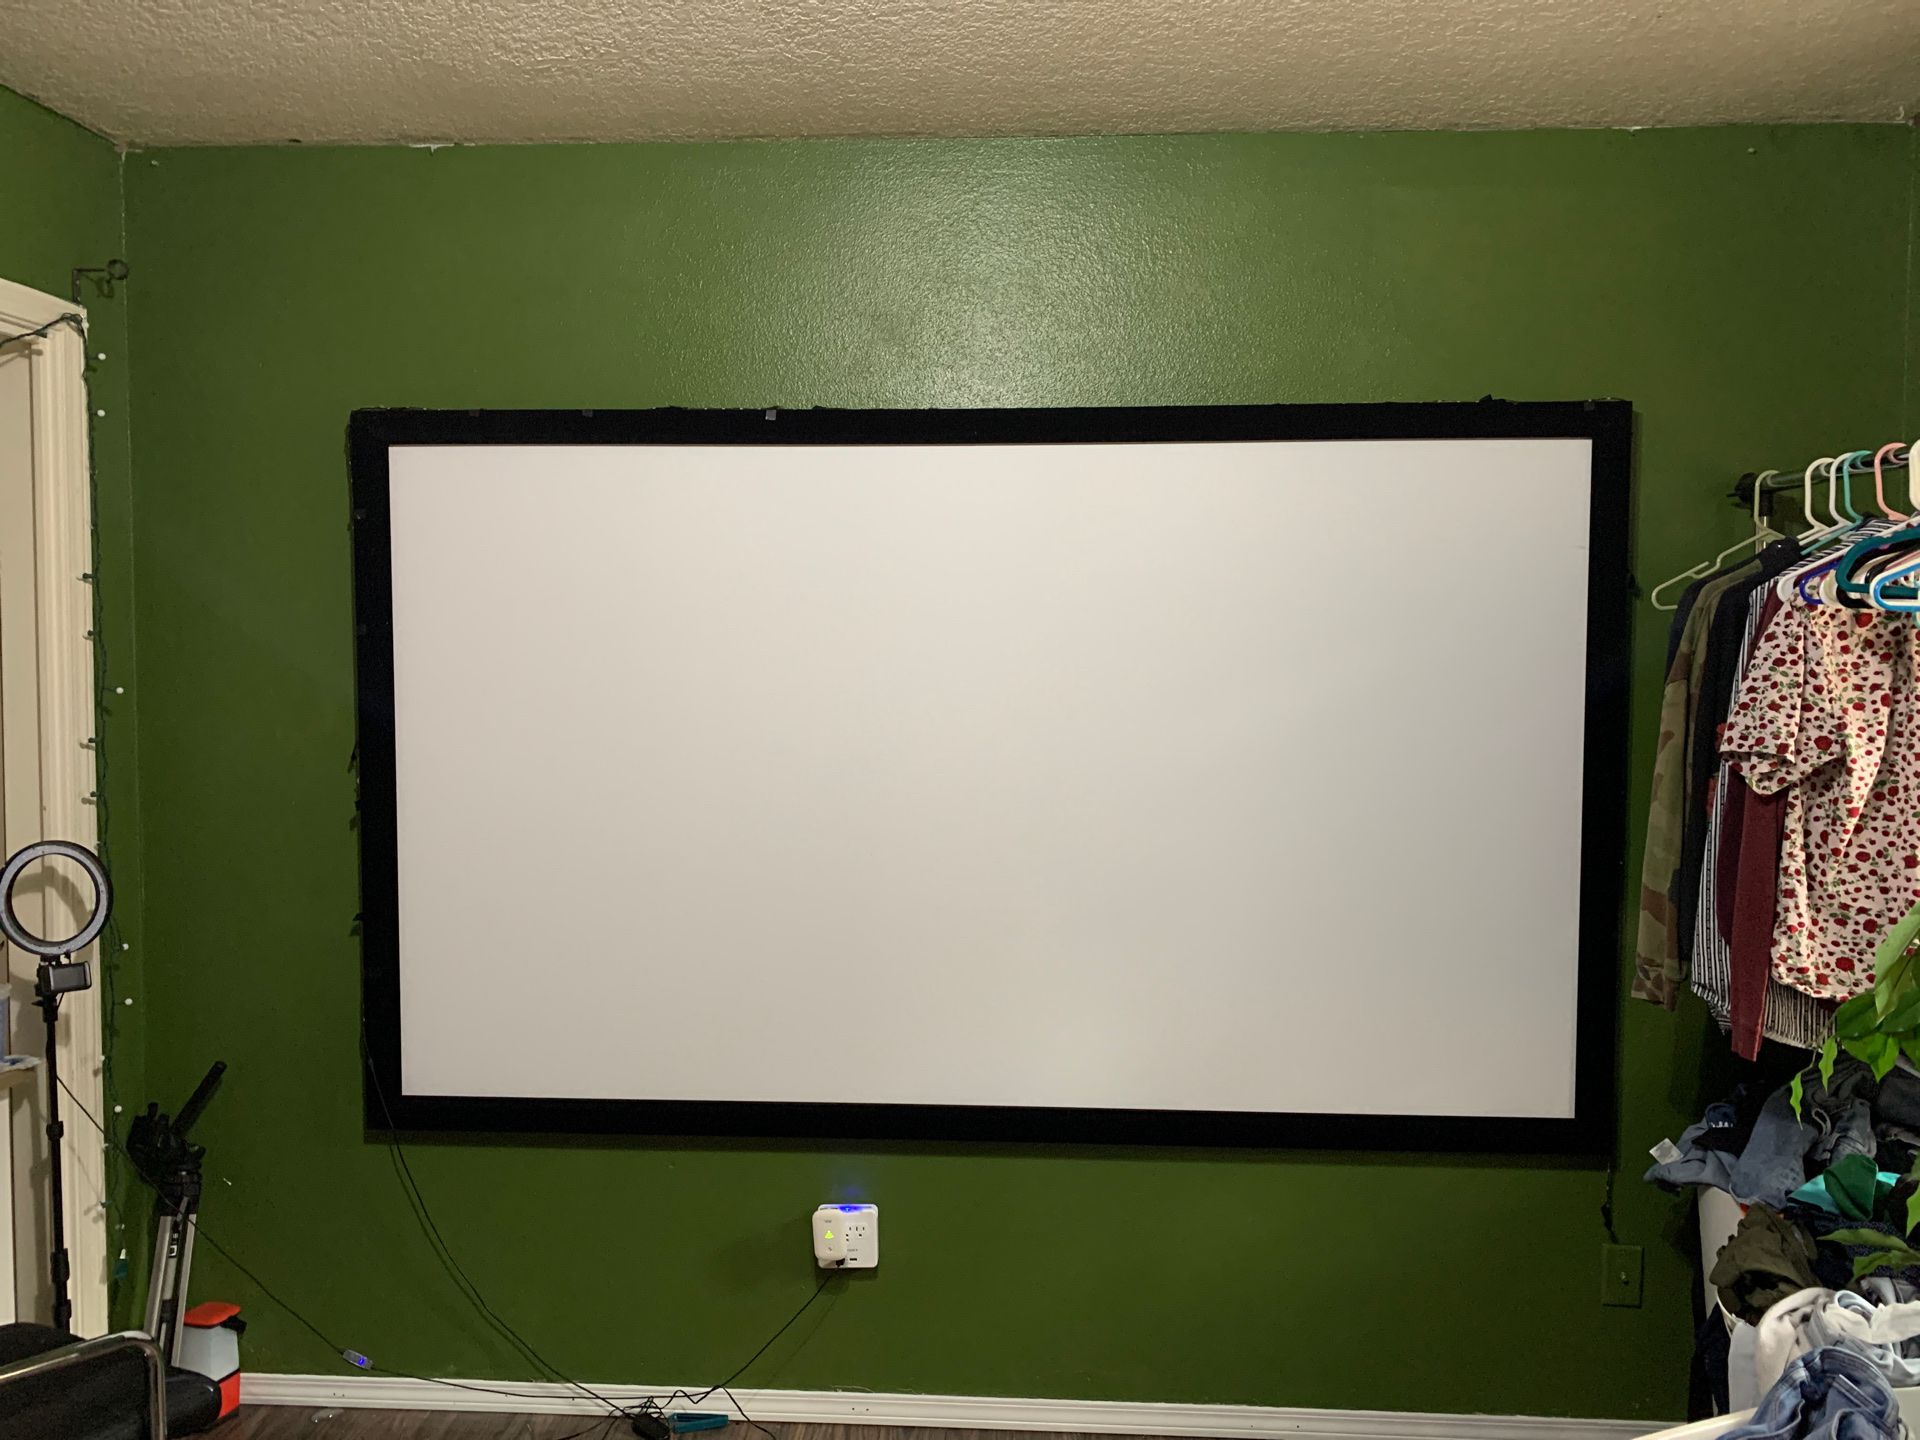 100” projector screen and 1080P 4k projector with mount